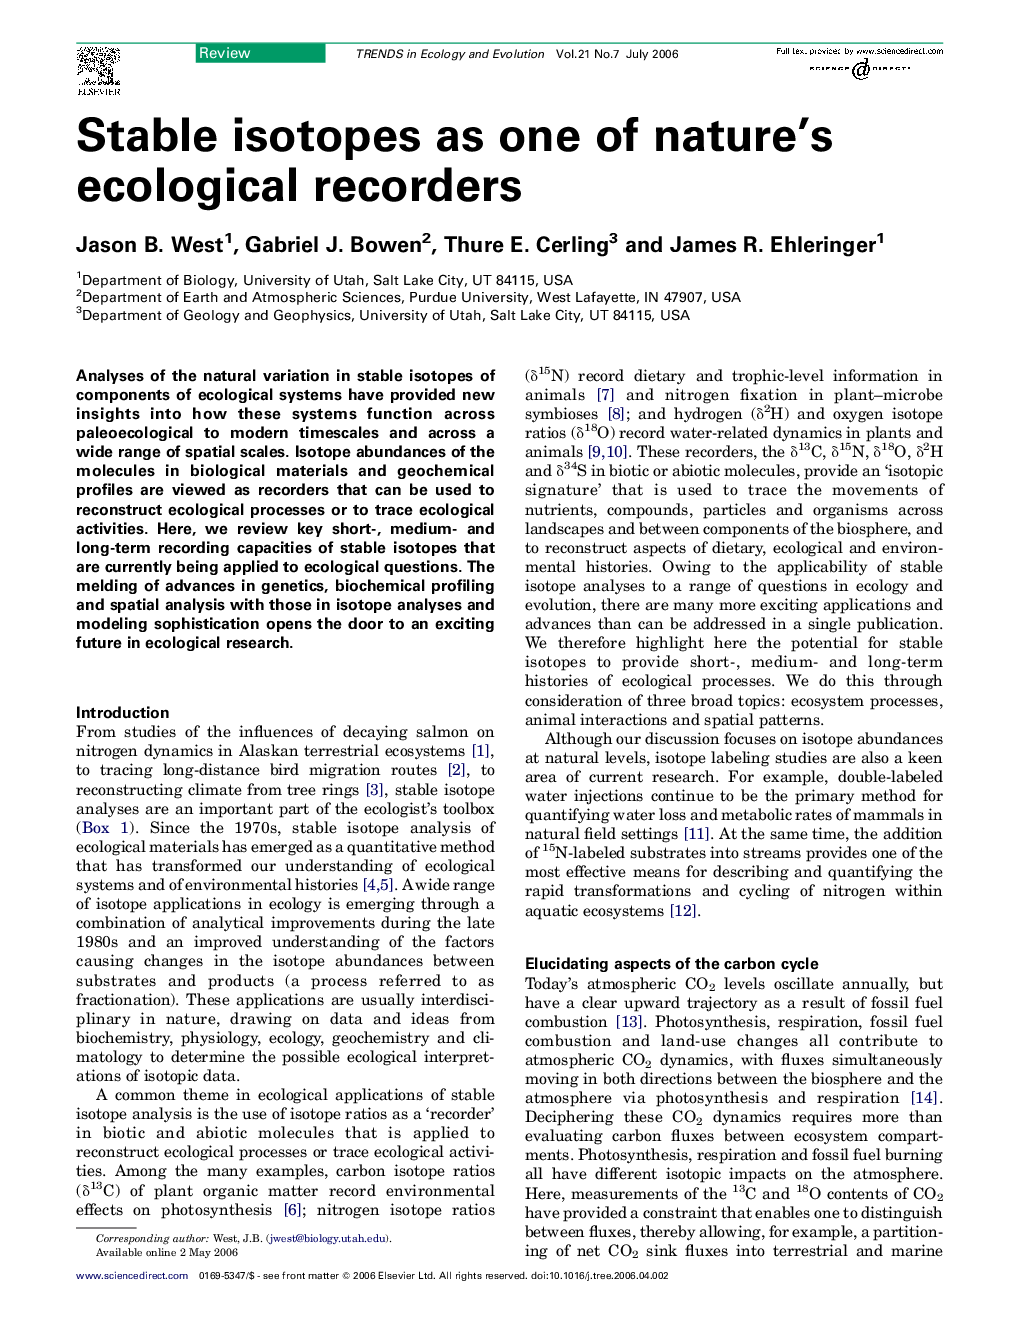 Stable isotopes as one of nature's ecological recorders